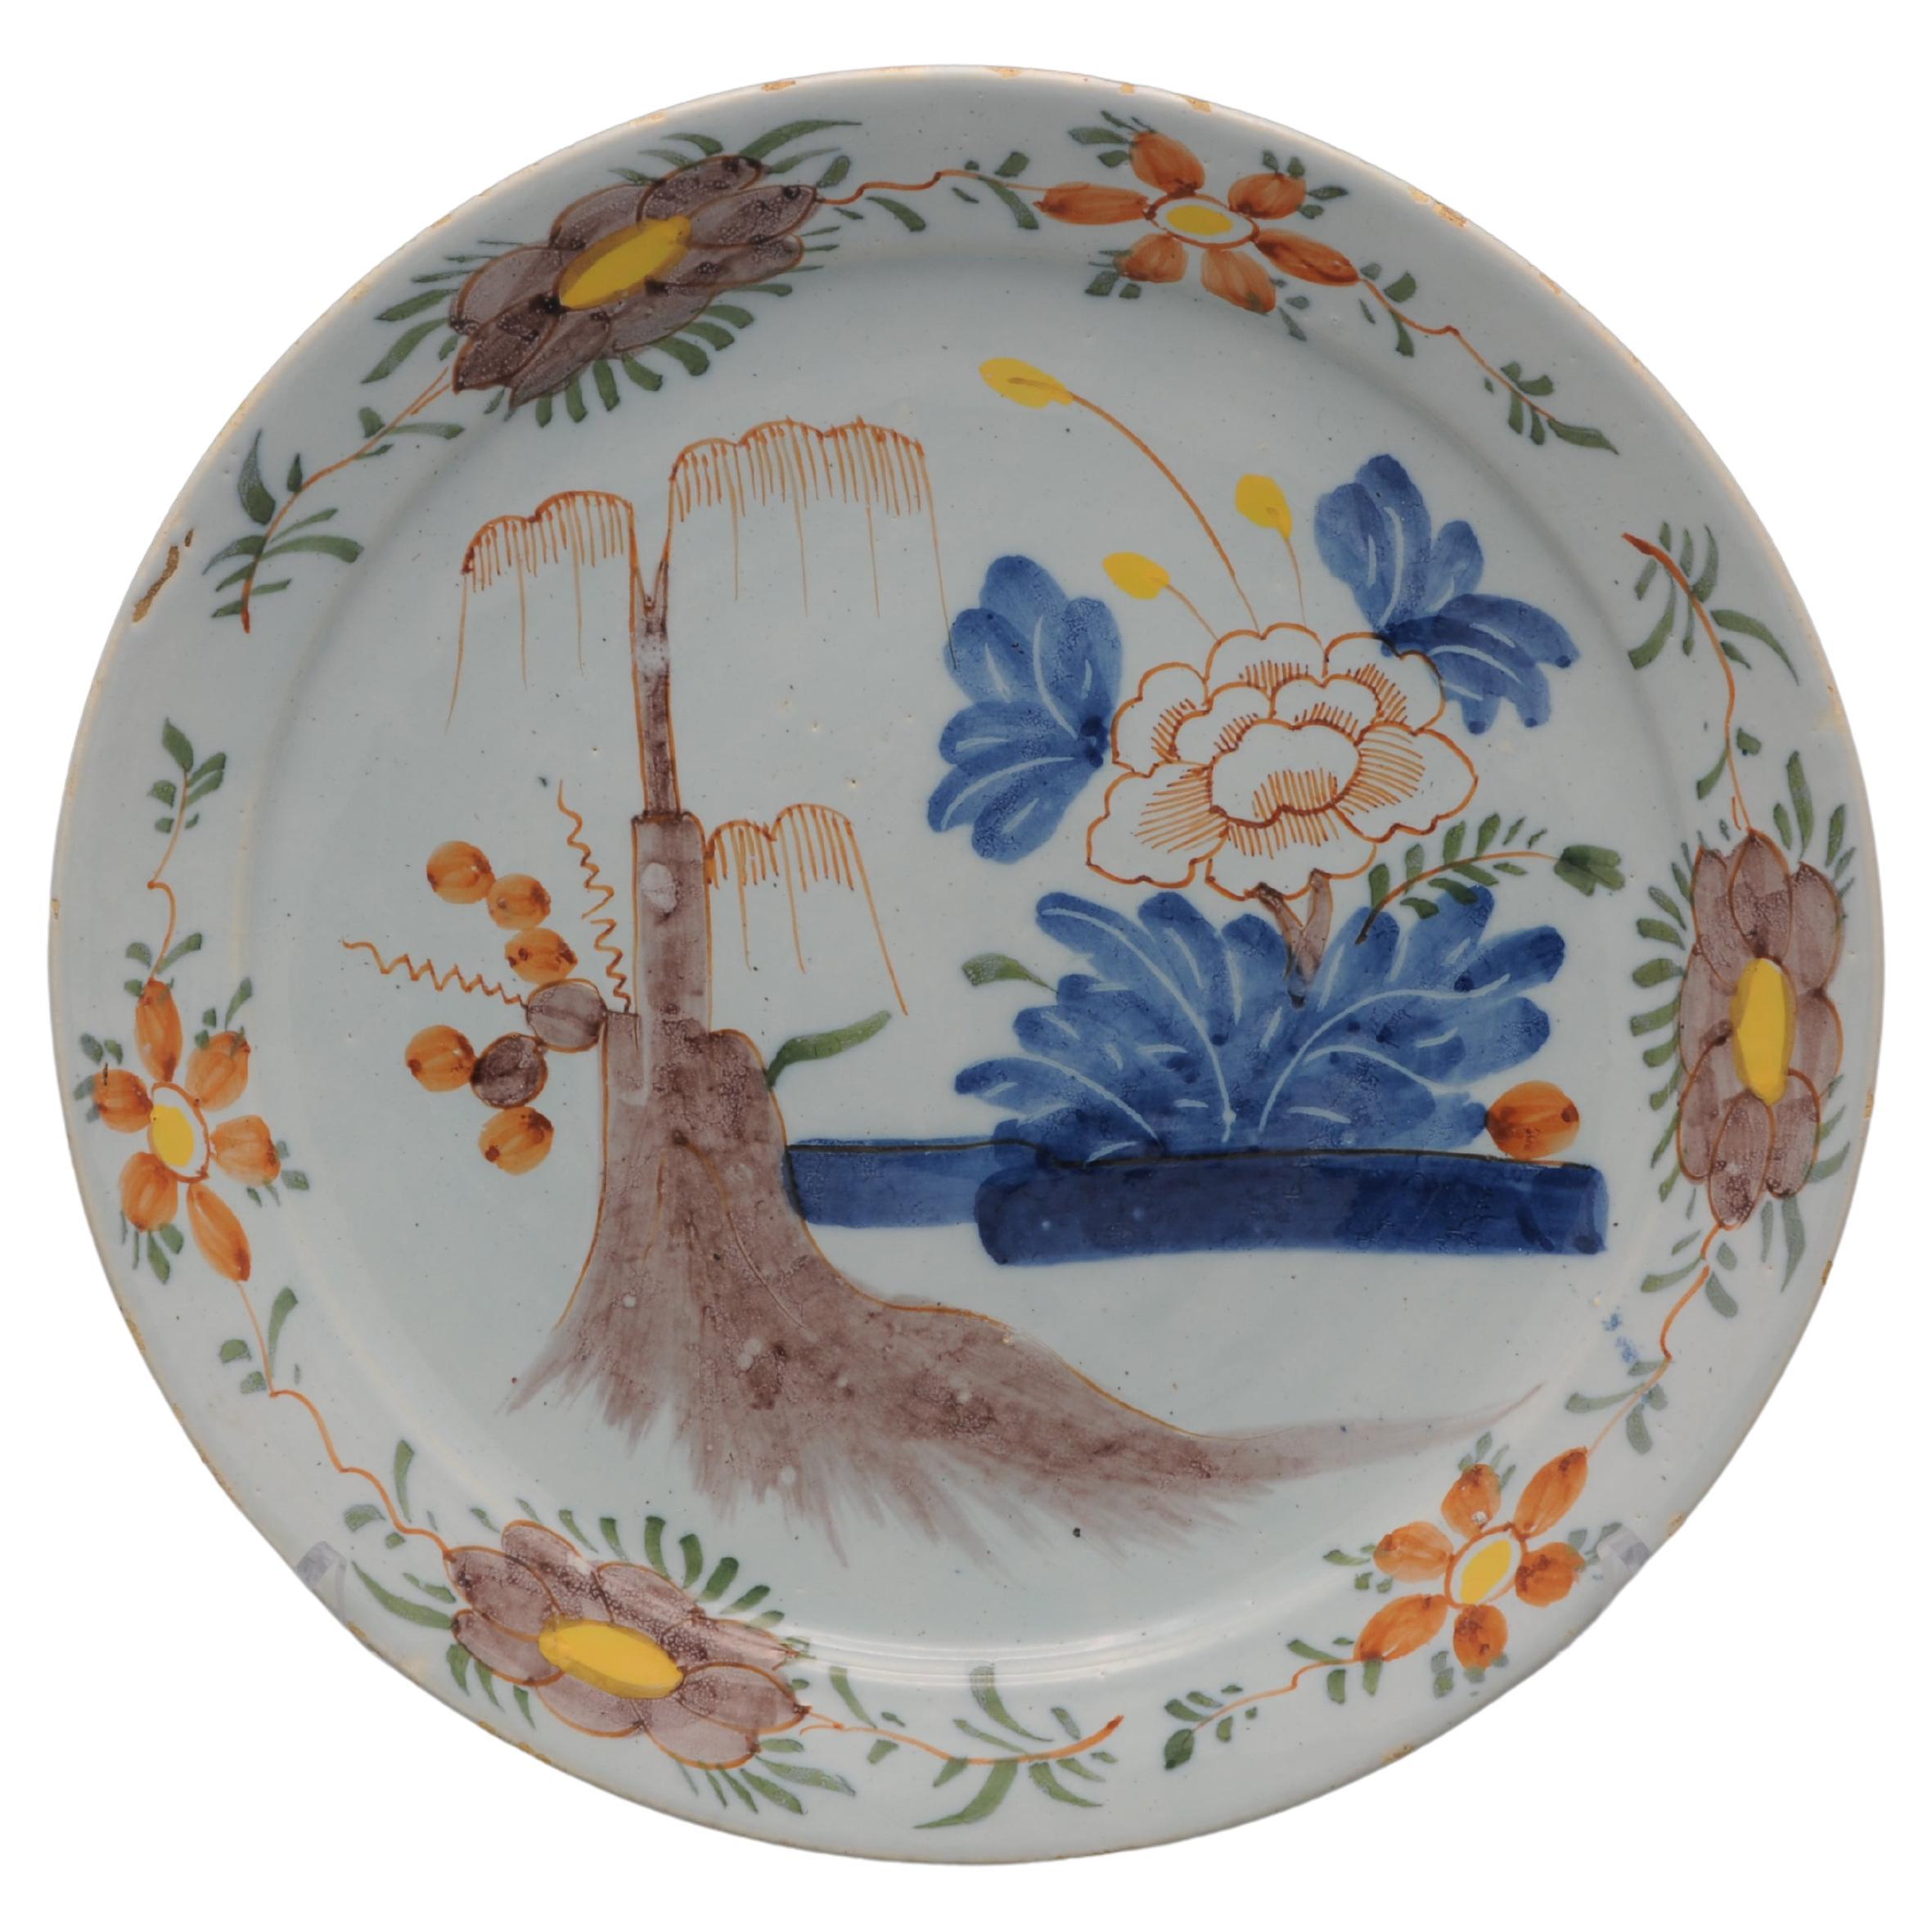 Delft  - 18th century Polychrome Chinoiserie Plate